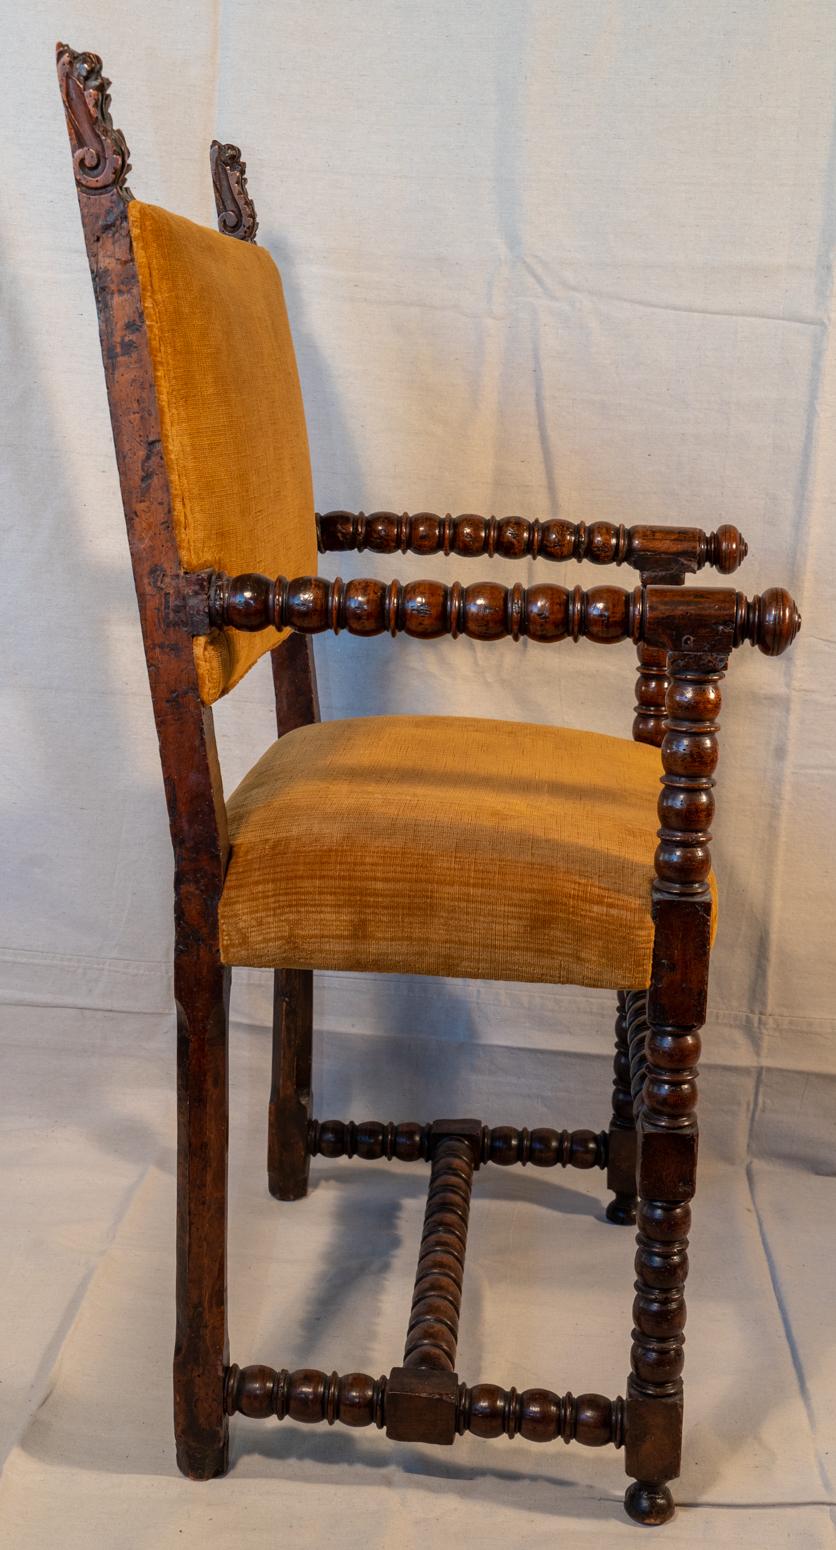 Late 17th century Italian walnut armchair
Classic Italian hall chair with bobbin turned arms, front legs and stretchers.
Very nice plush amber colored velvet upholstery (older re-cover) in very good condition. Tops of the back legs with carved